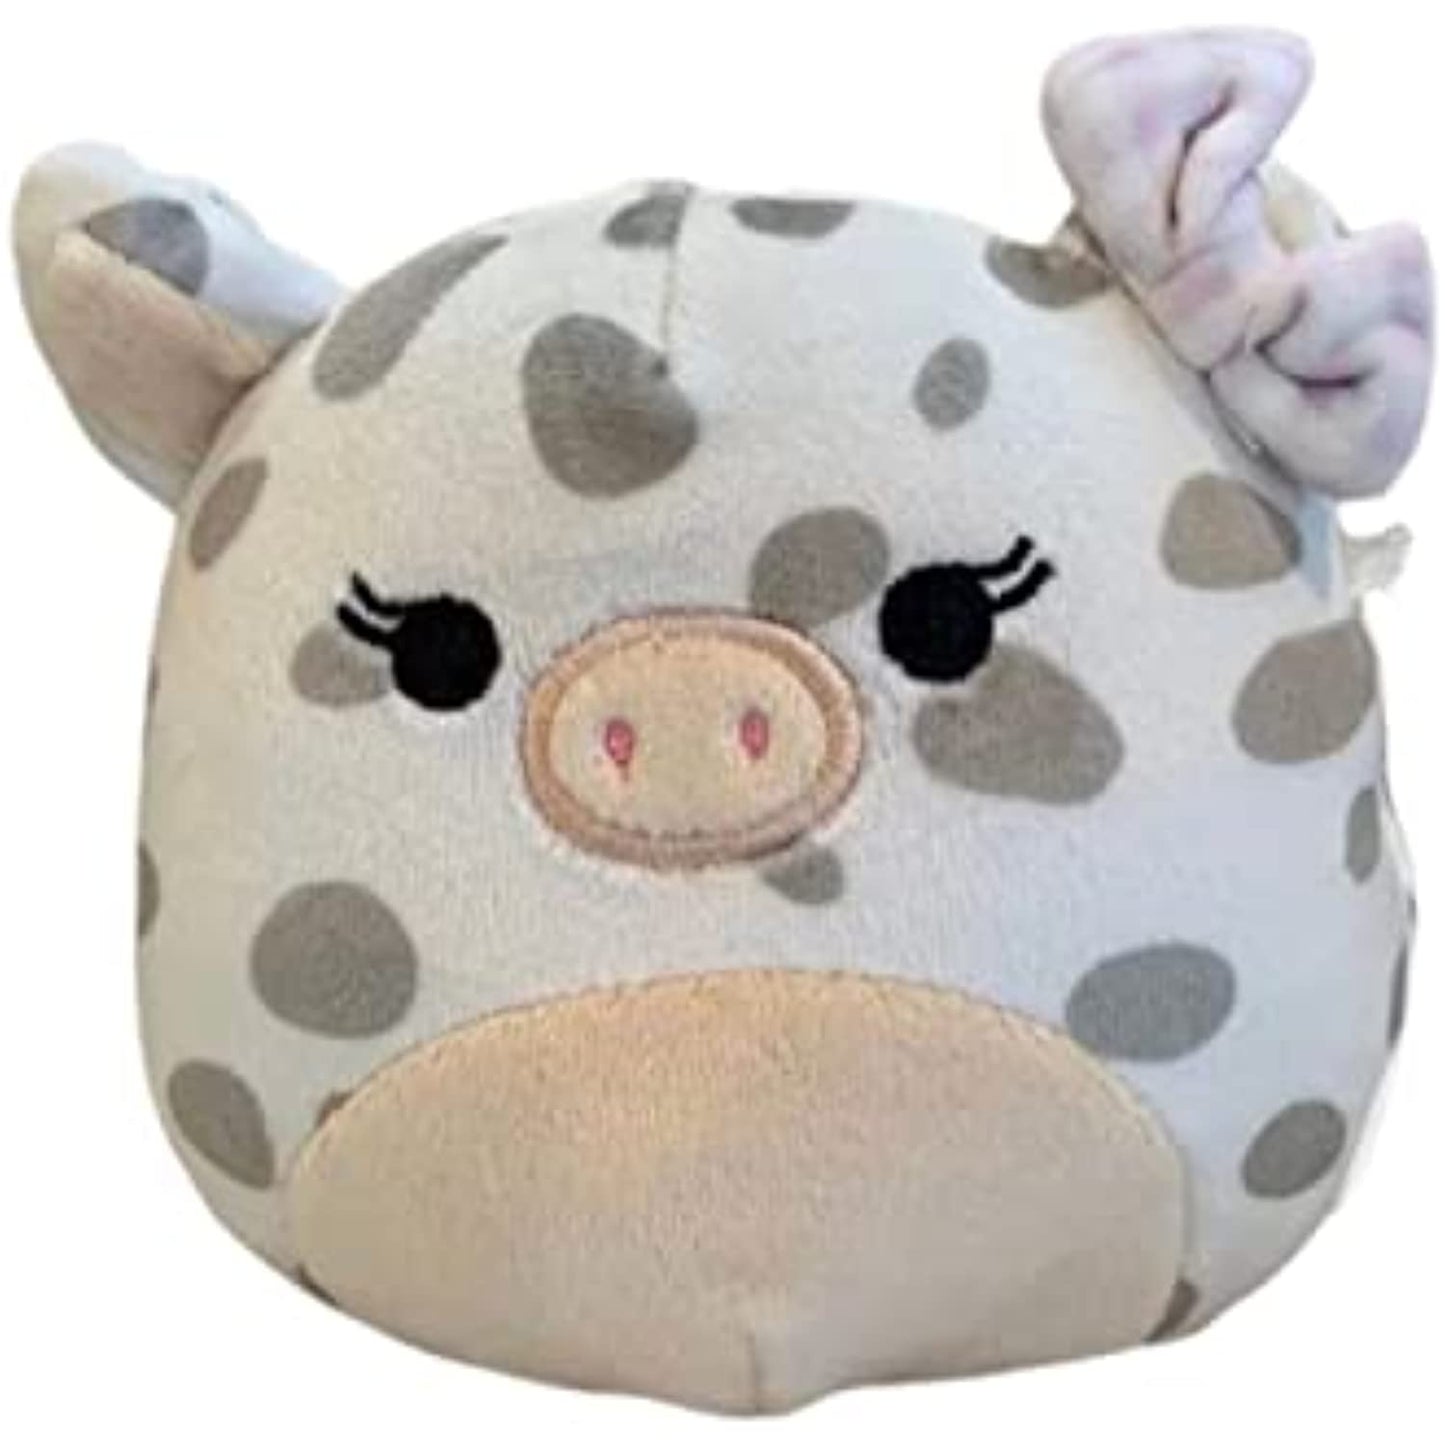 Squishmallows Rosie the Pig with Bow 4.5" Plush Stuffed Animal